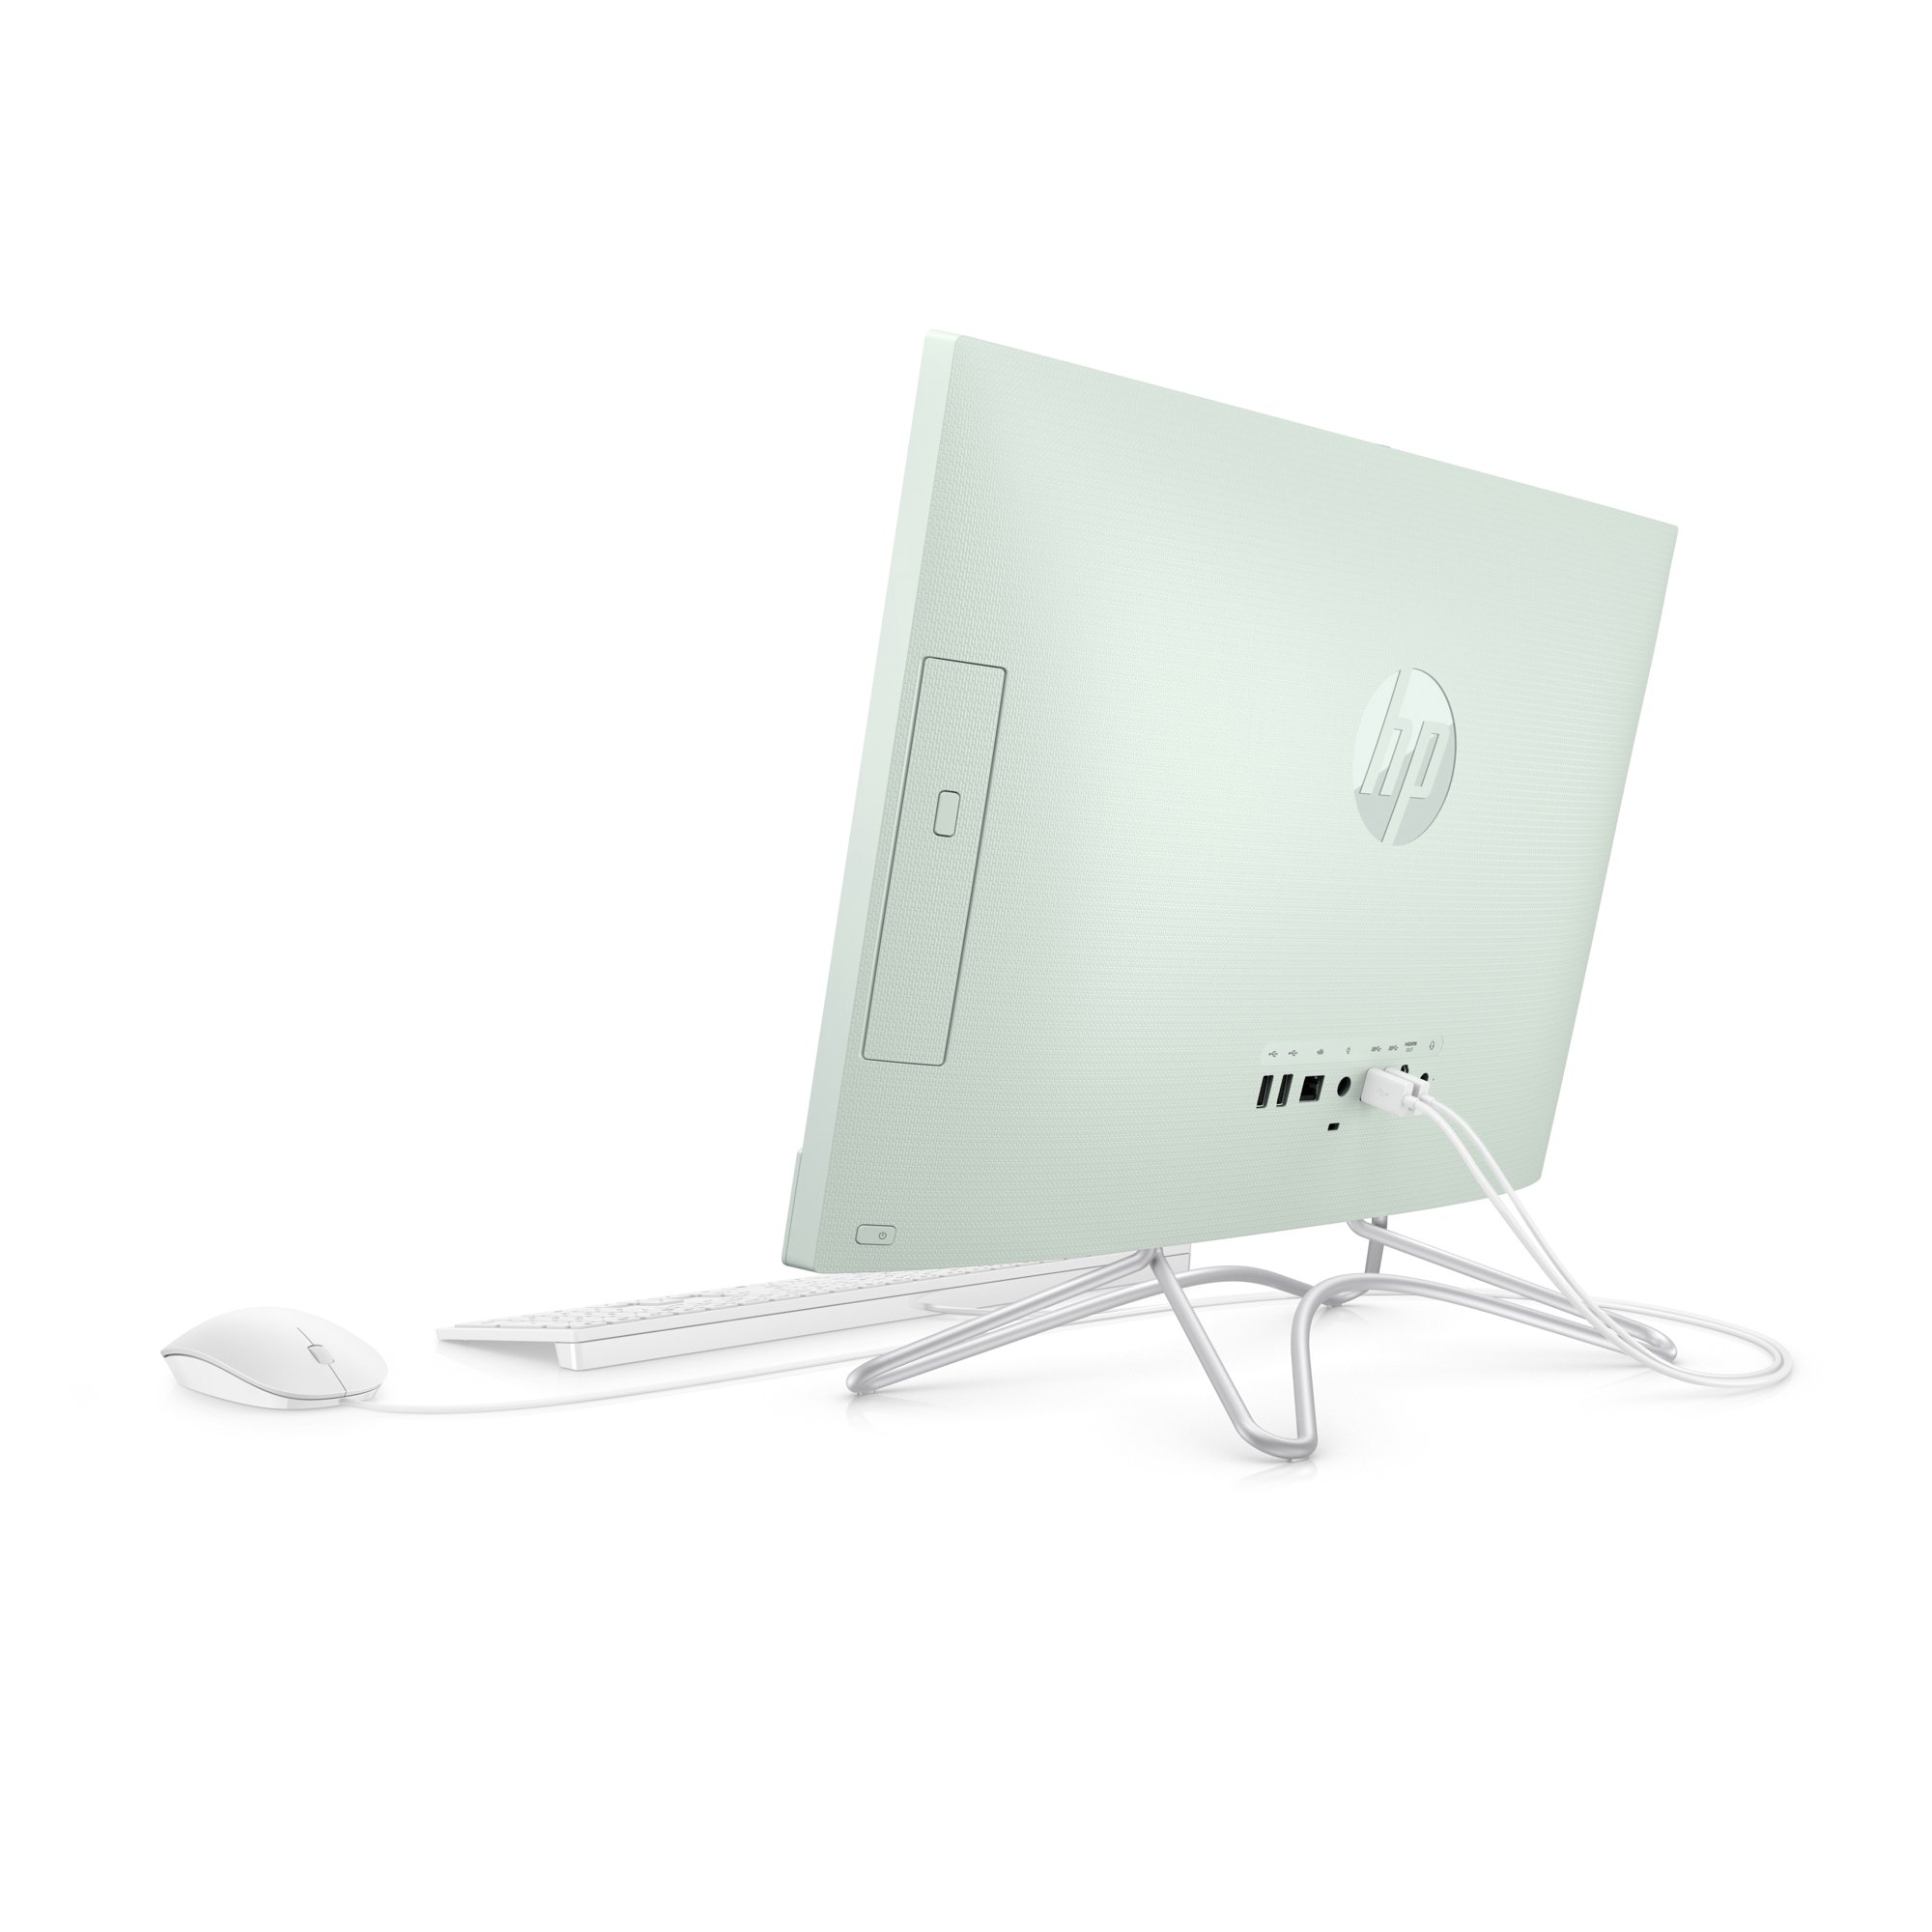 HP 22-c0073w All-in-One, 22" Display, Intel Celeron G4900T 2.9 GHz, 4GB RAM, 1TB HDD, Mint Color - image 4 of 5